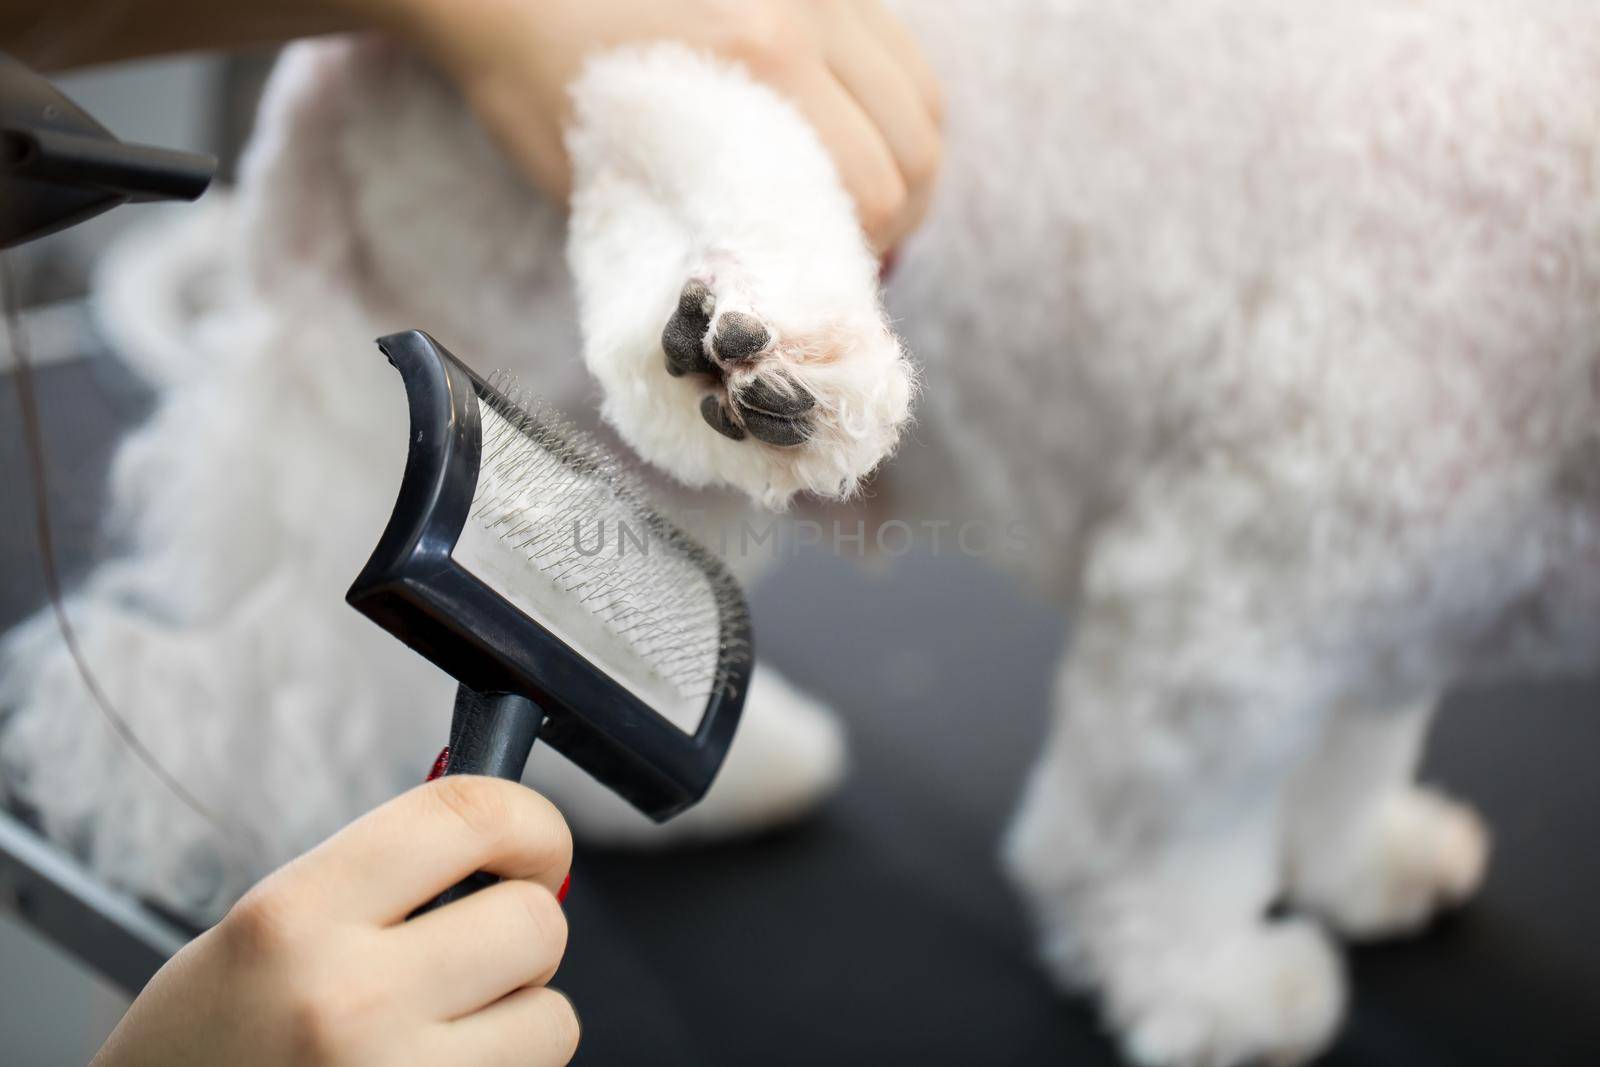 Grooming animals, grooming, drying and styling dogs, combing wool. Grooming master cuts and shaves, cares for a dog Bichon Frise. by StudioPeace